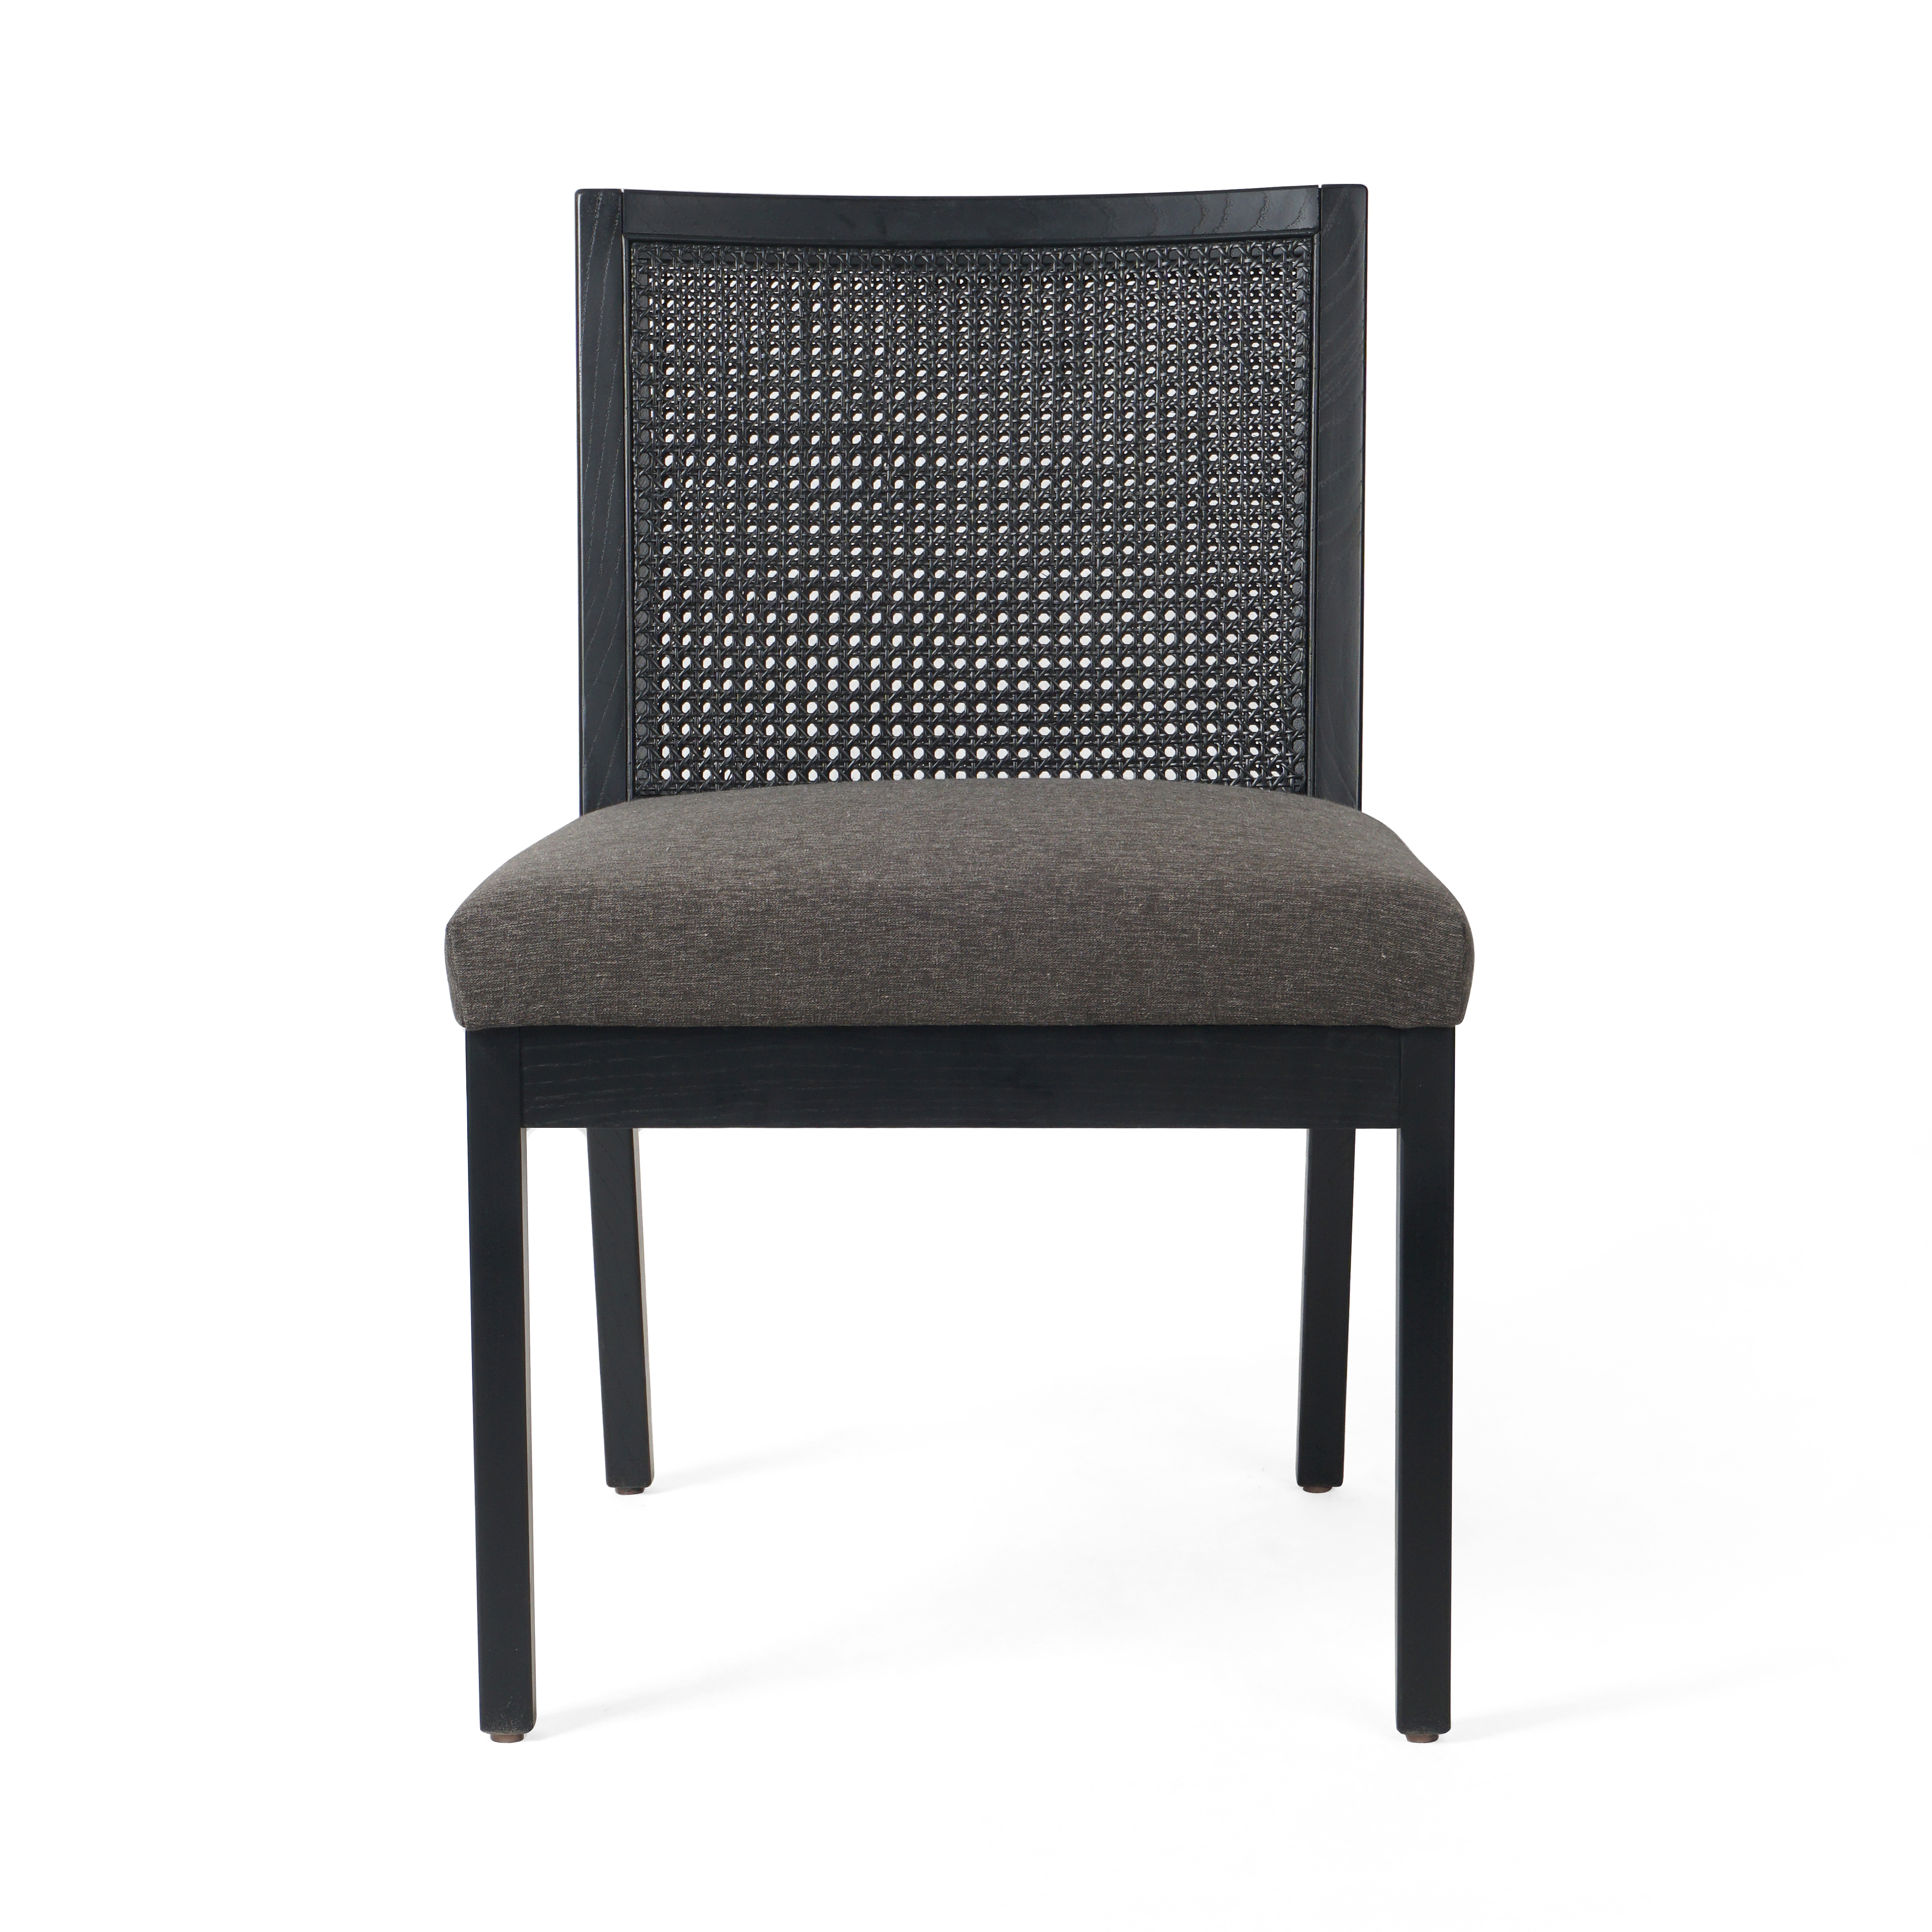 Antonia Armless Dining Chair-Charcl - Image 2